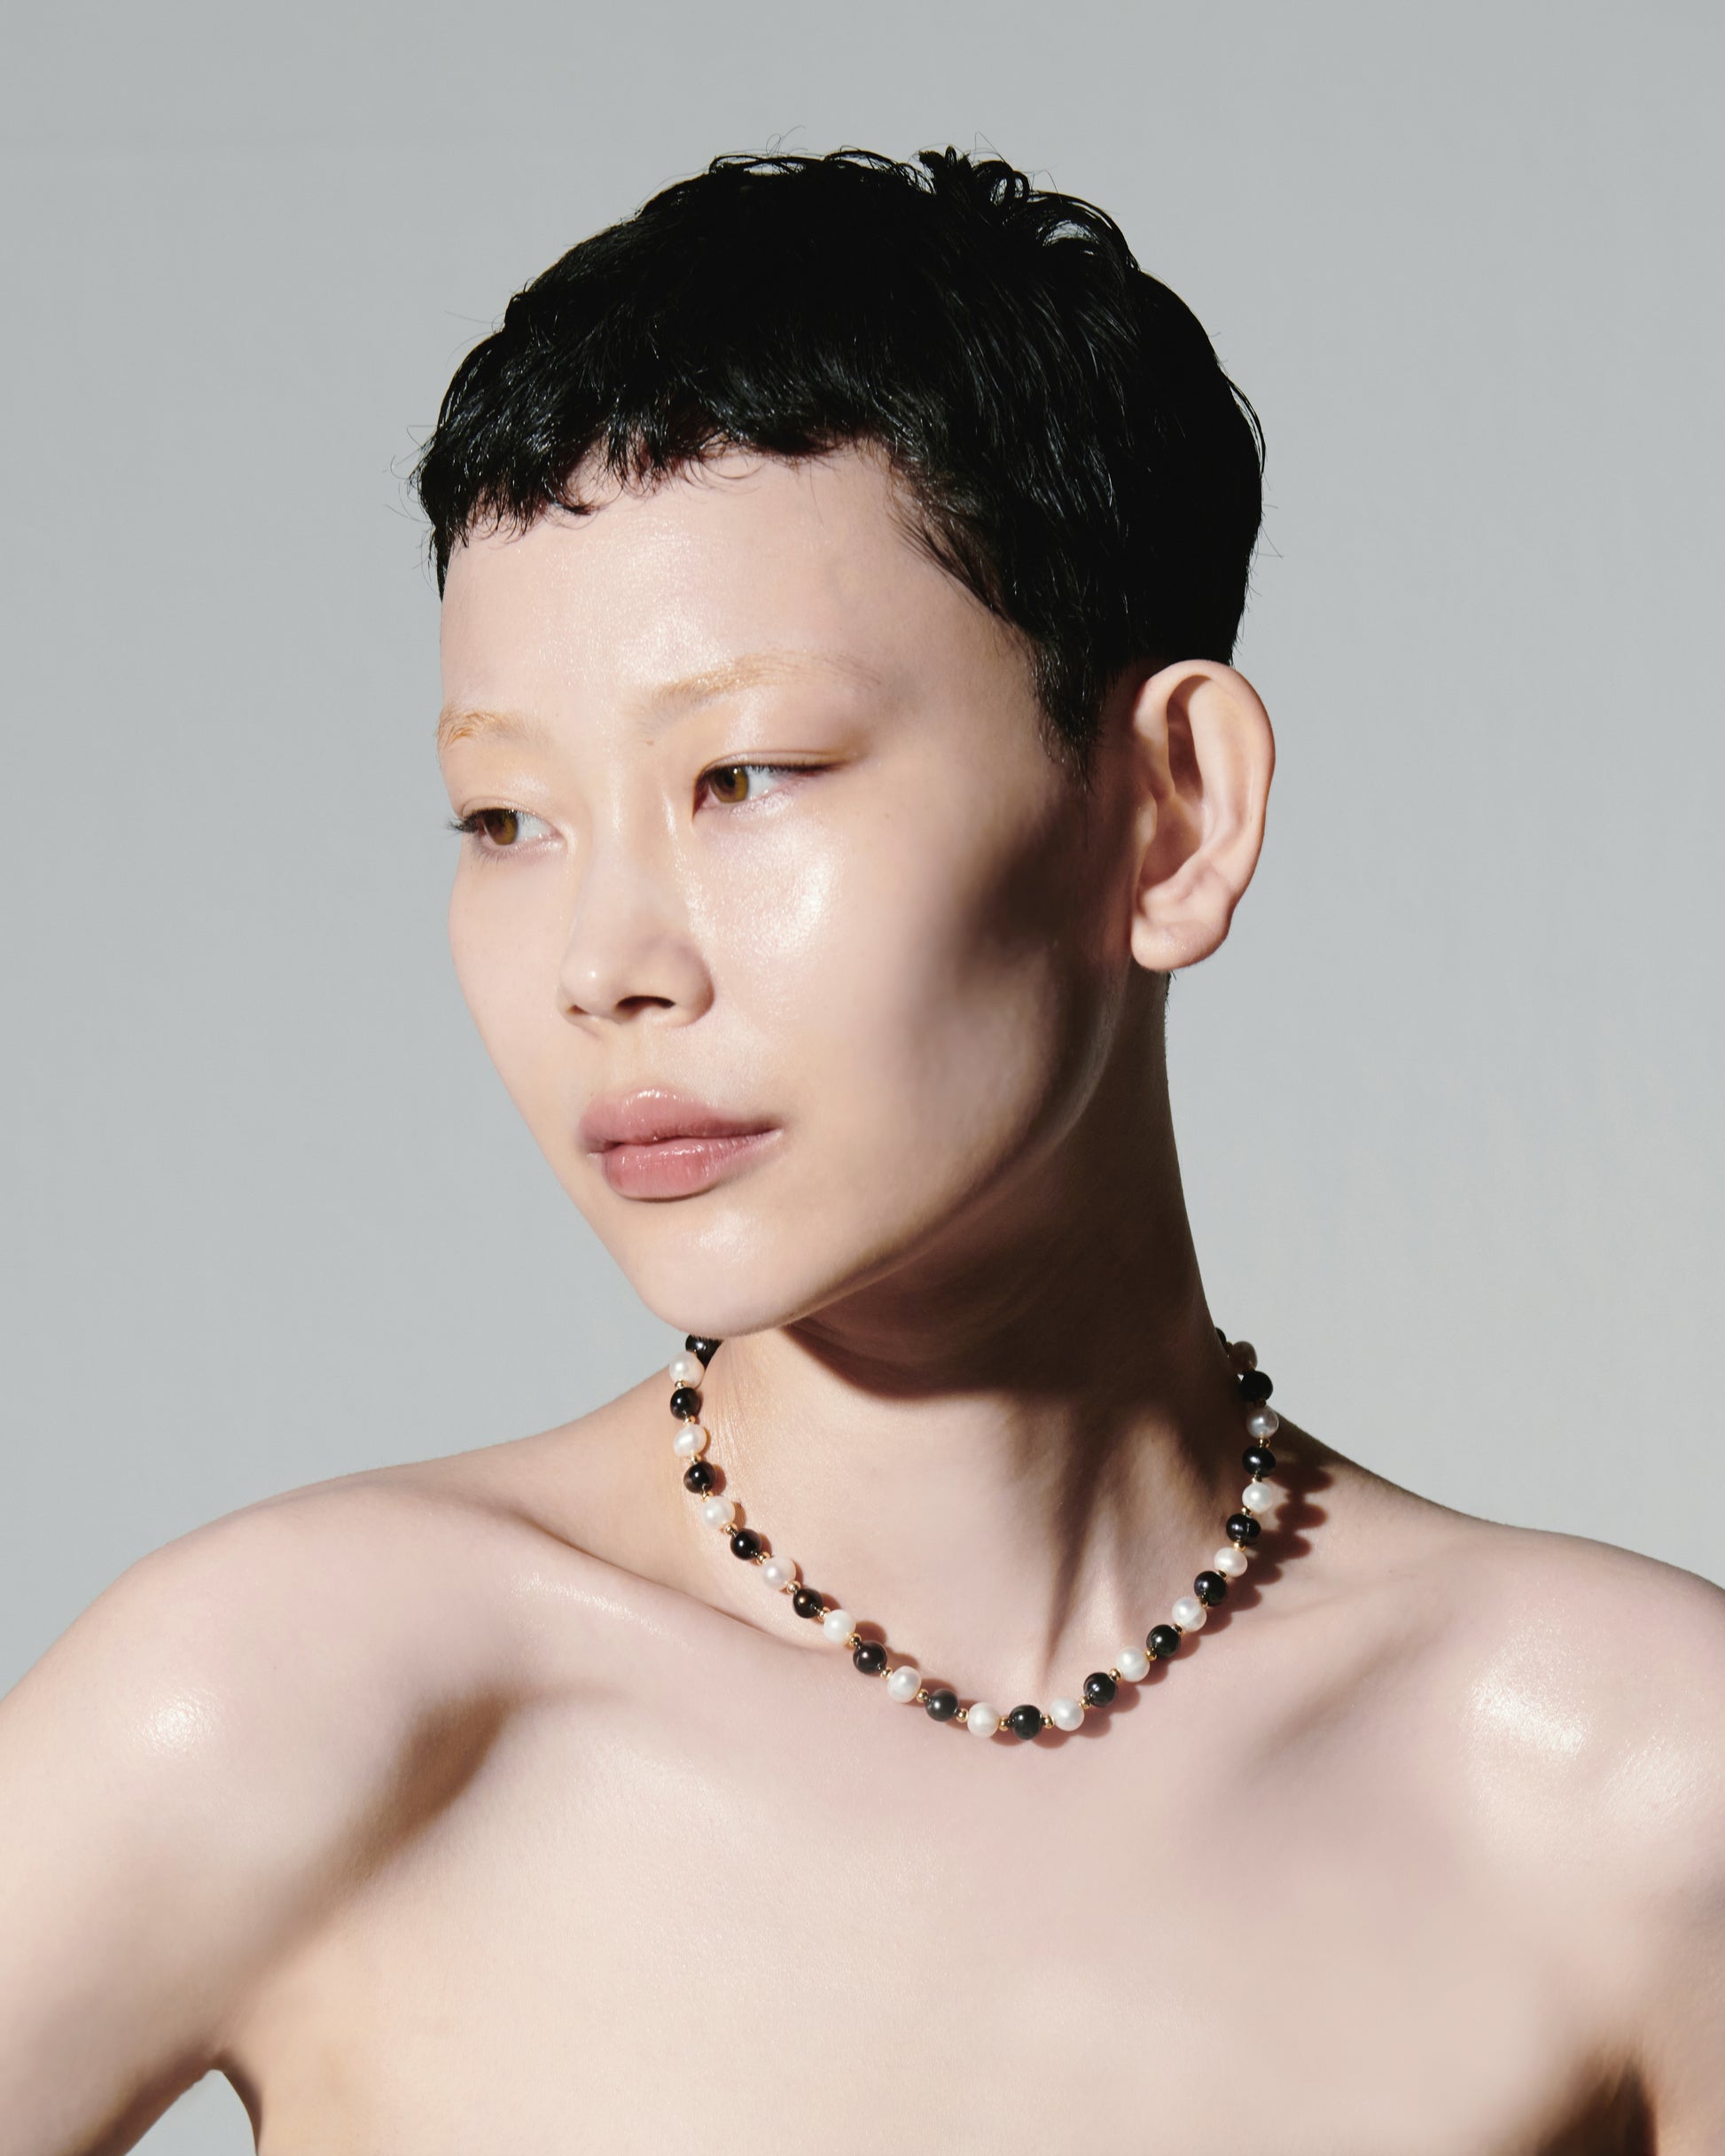 Nectar Black and White Ivory Pearls With Gold Metal Beads Necklace Choker Classic Modern Style Seoul Korea Juxtaposition Studio Fashion Items